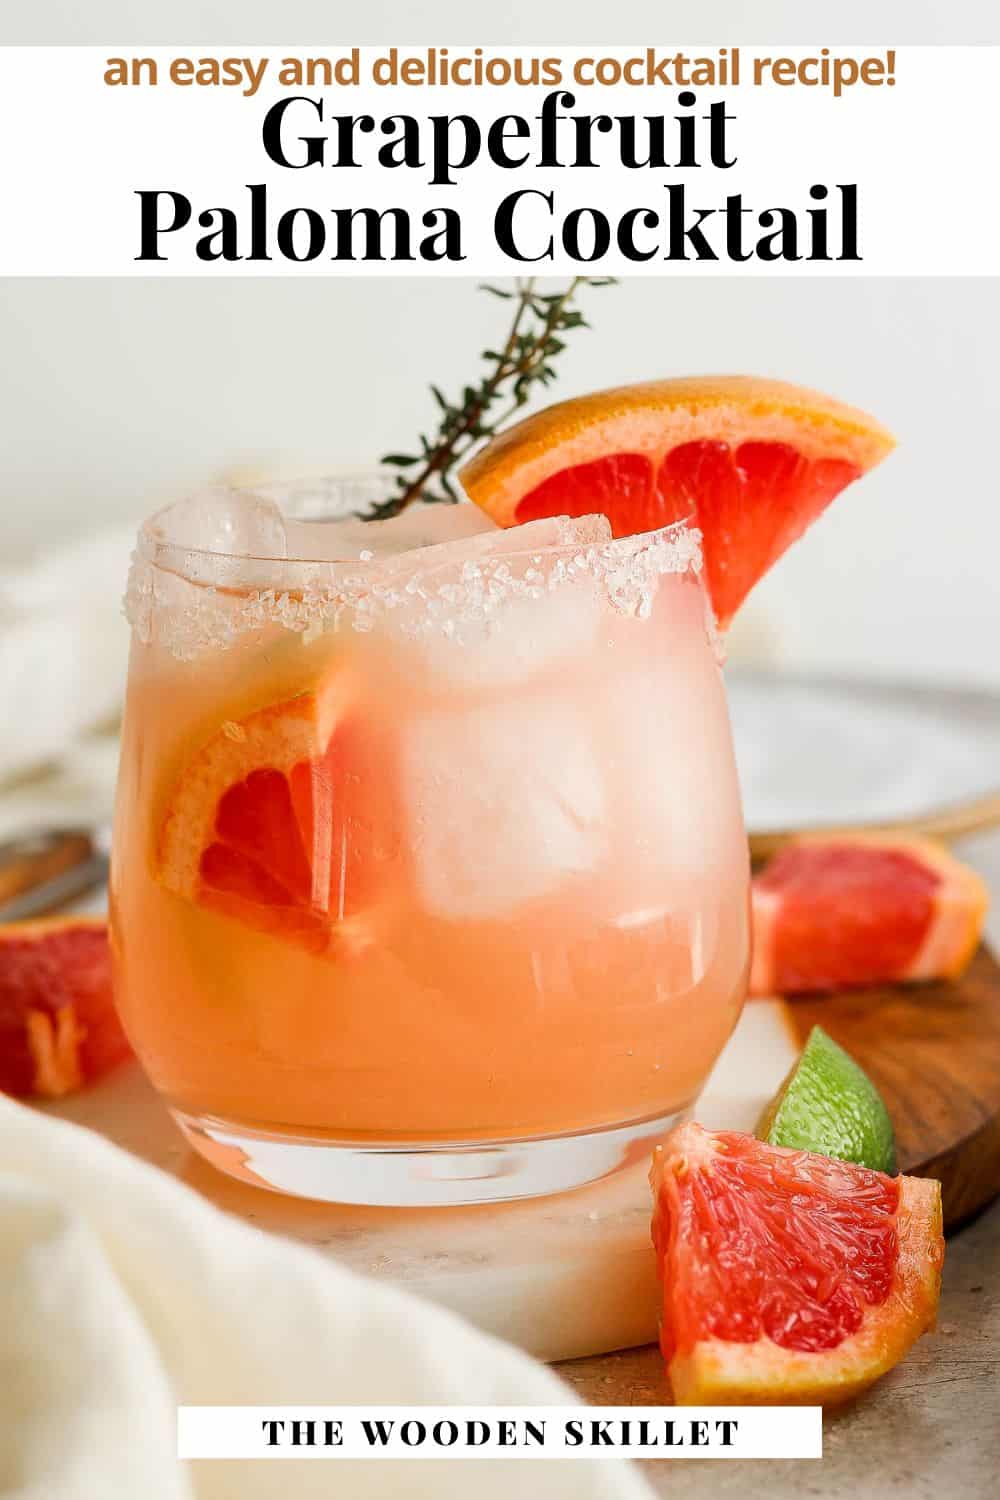 Pinterest image showing a grapefruit paloma with the title "grapefruit paloma cocktail. An easy and delicious cocktail recipe!"